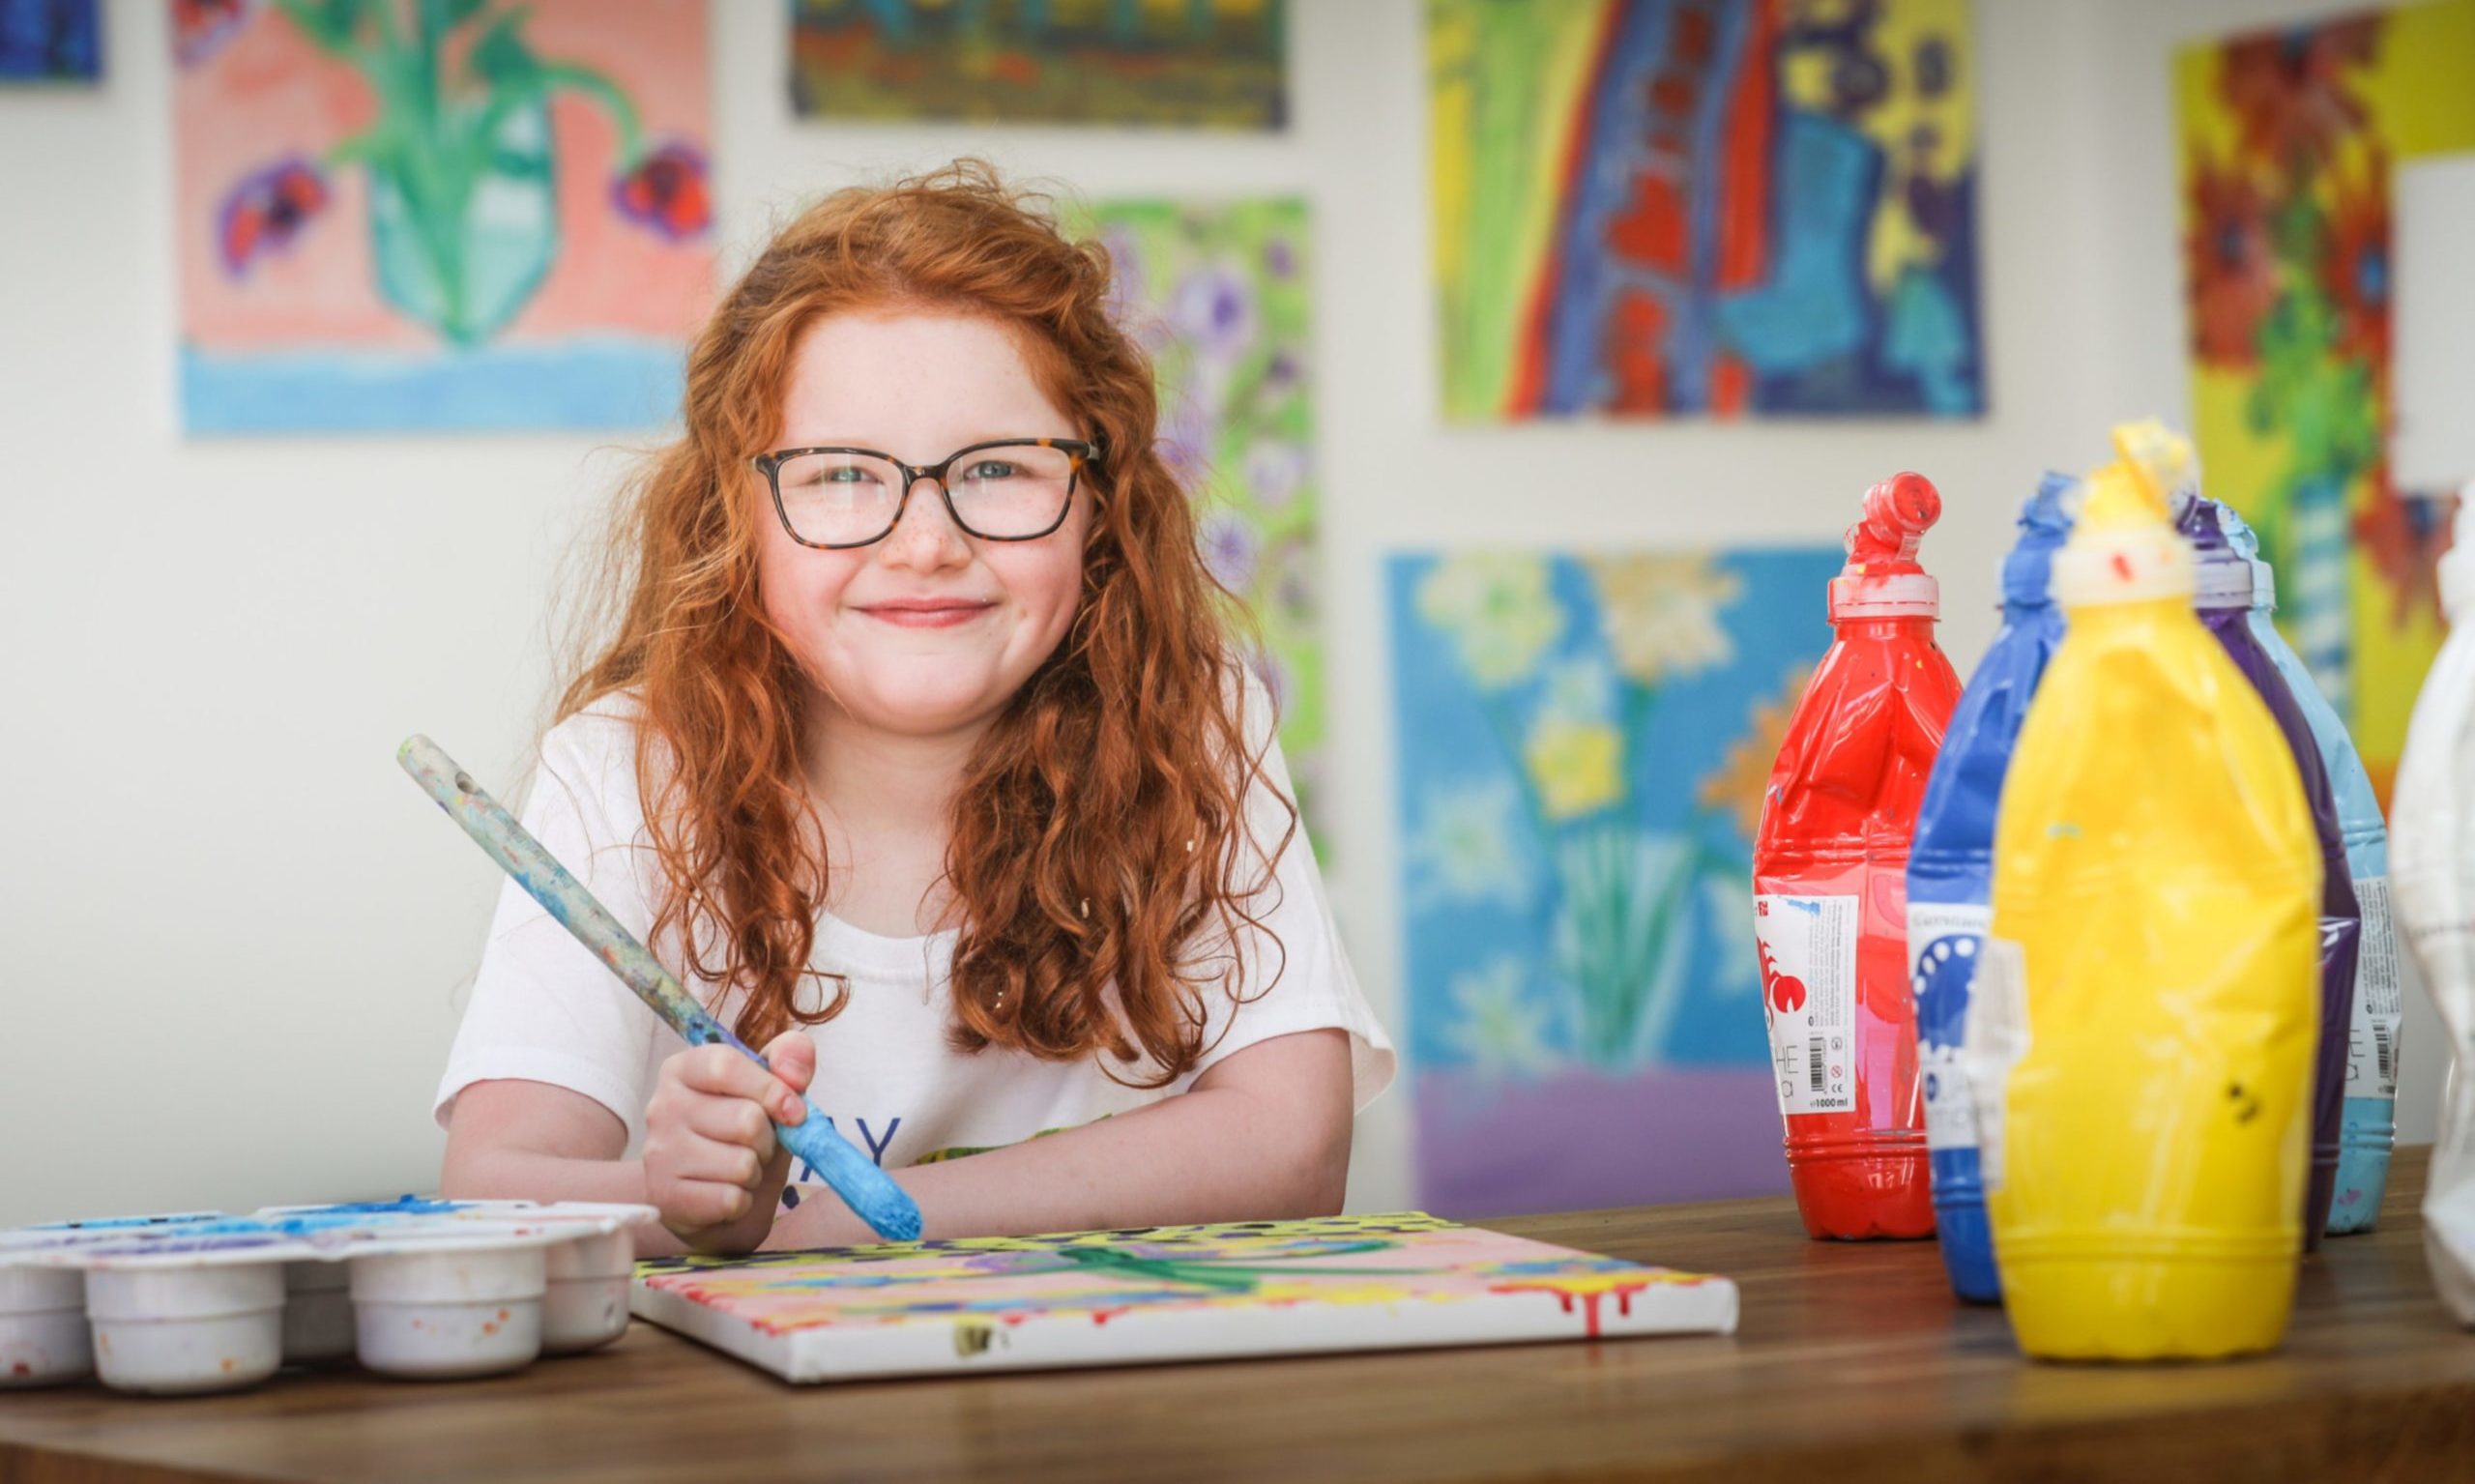 The Evening Telegraph, CR0021598, News, Lindsey Hamilton story, Budding artist Lauren Chesters, 7, has sold t-shirts she designed and has raised more than £600 for Dundee Bairns. Picture shows; Lauren Chesters, 7, doing what she does best. Saturday 30th May, 2020. Mhairi Edwards/DCT Media